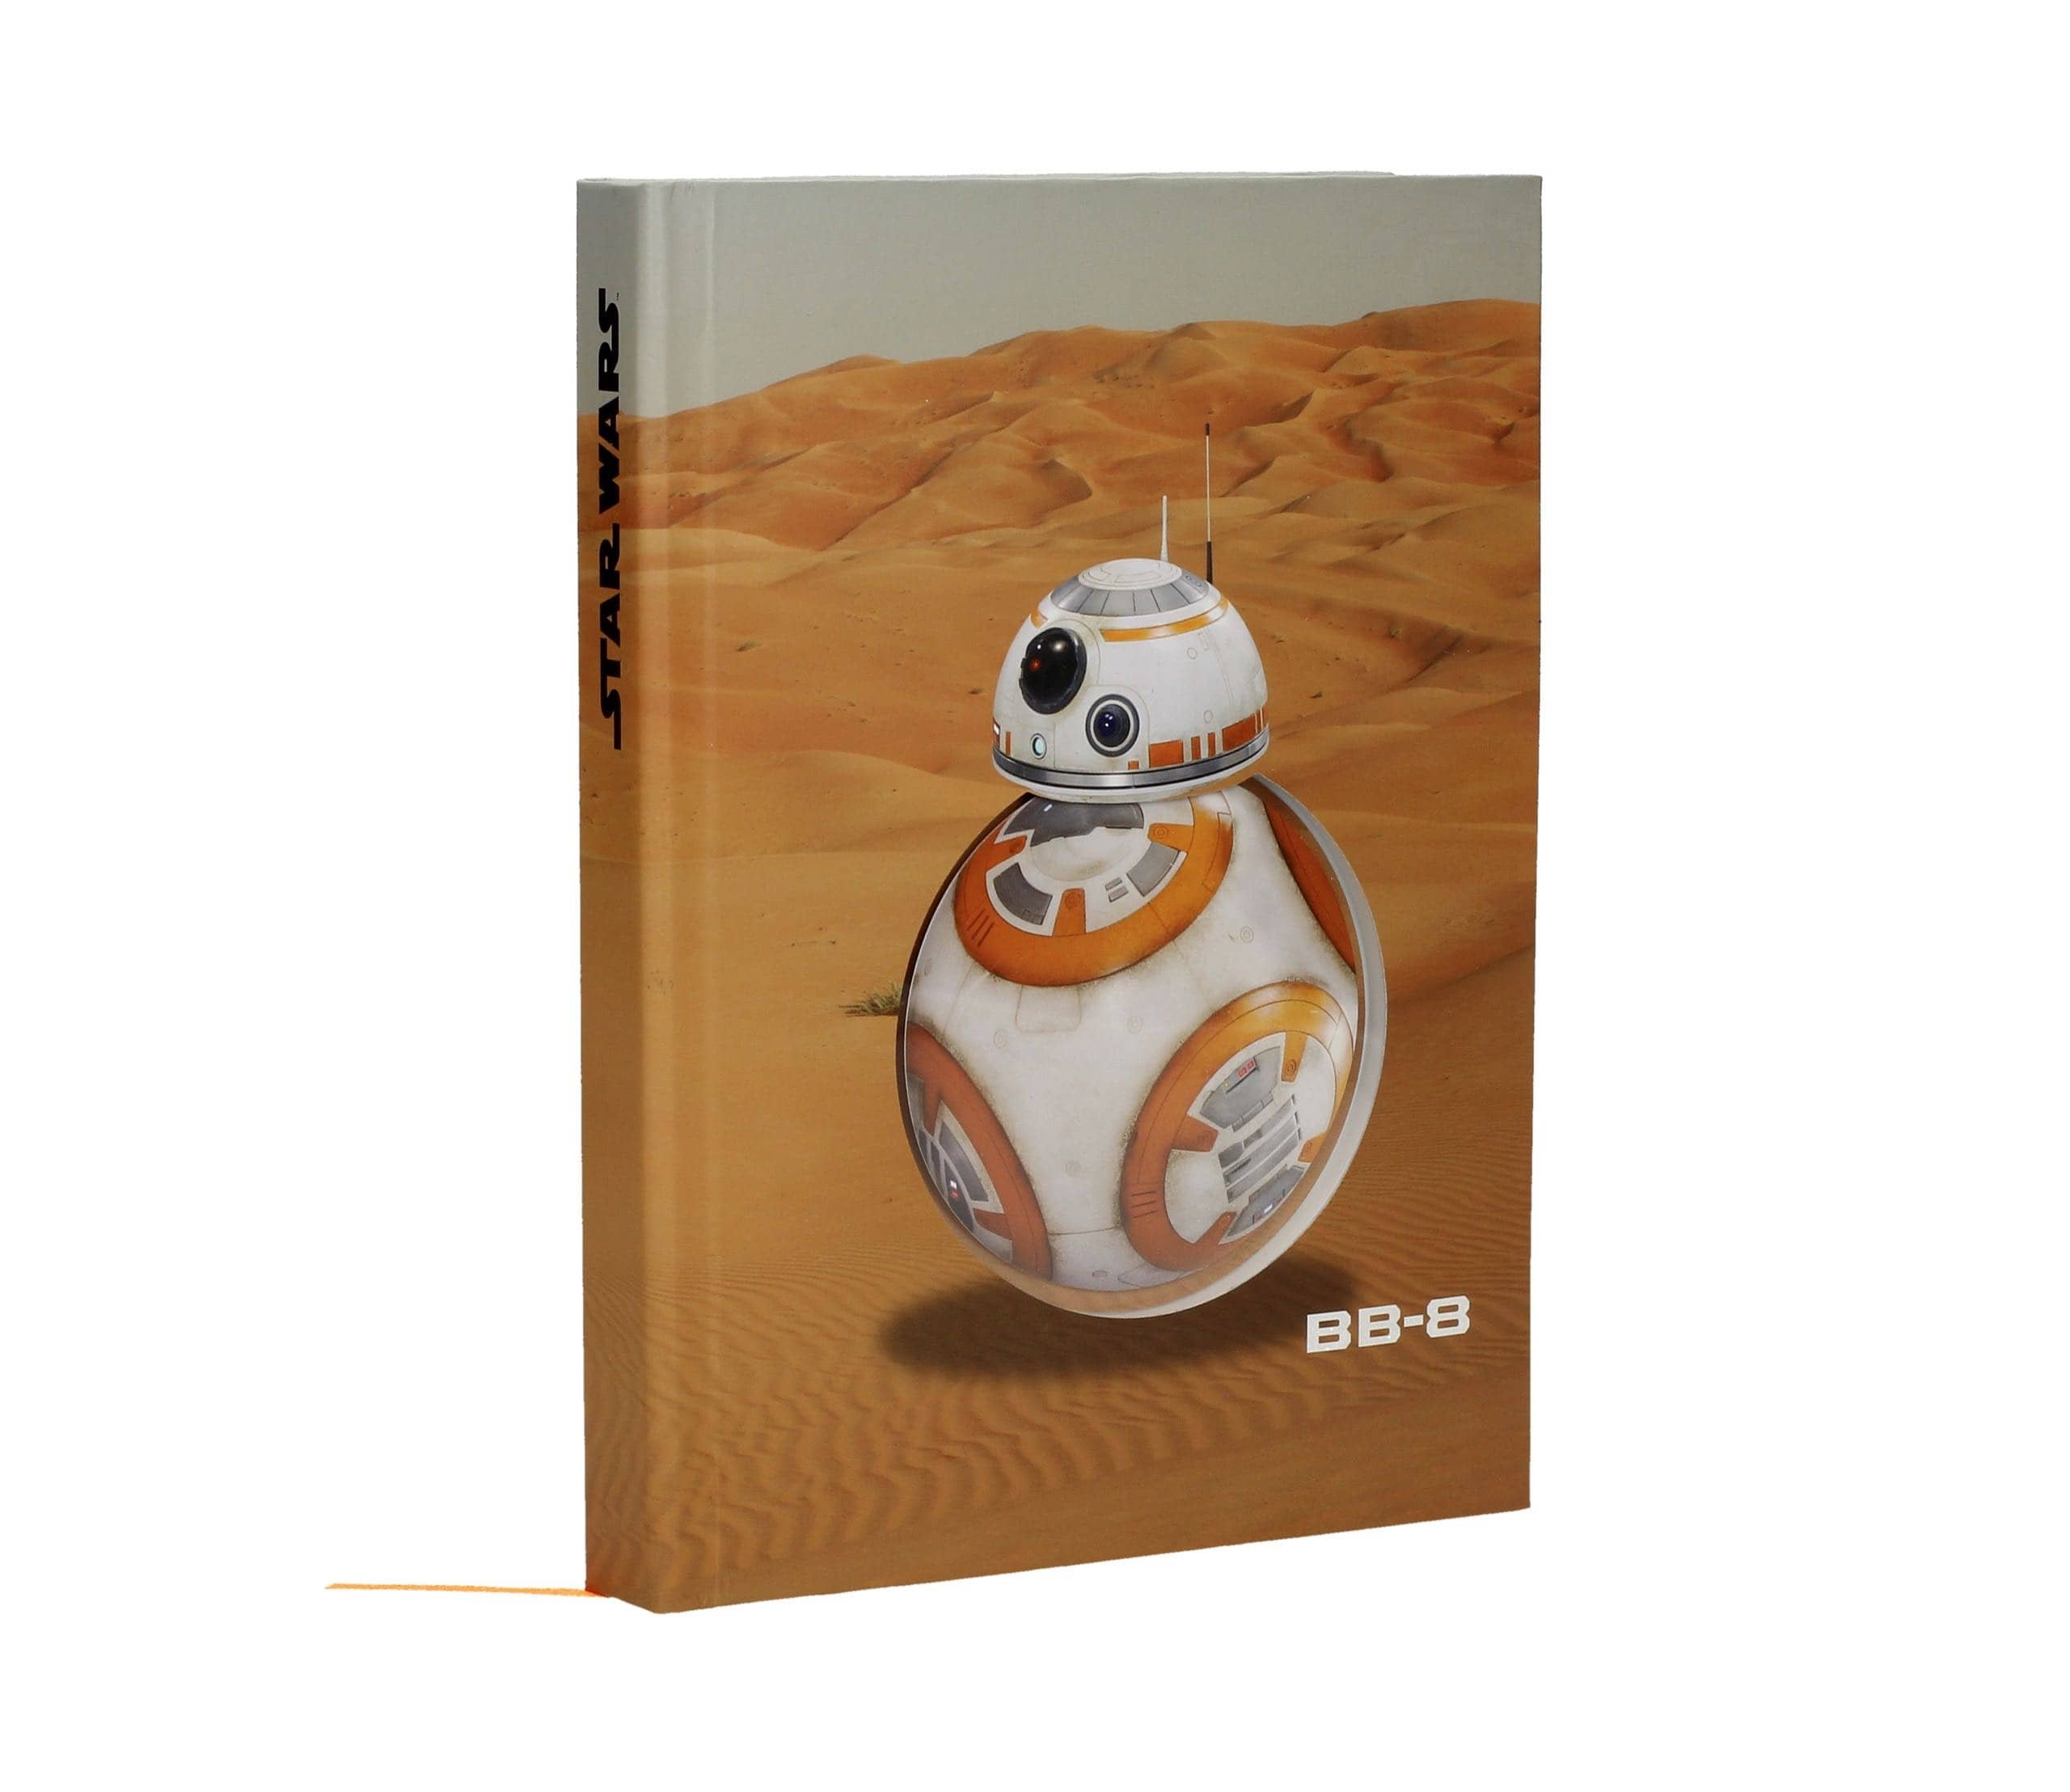 SD toys - Cahier Sonore Et Lumineux Star Wars - BB-8 Desert Style 15x20cm - 8436546892489